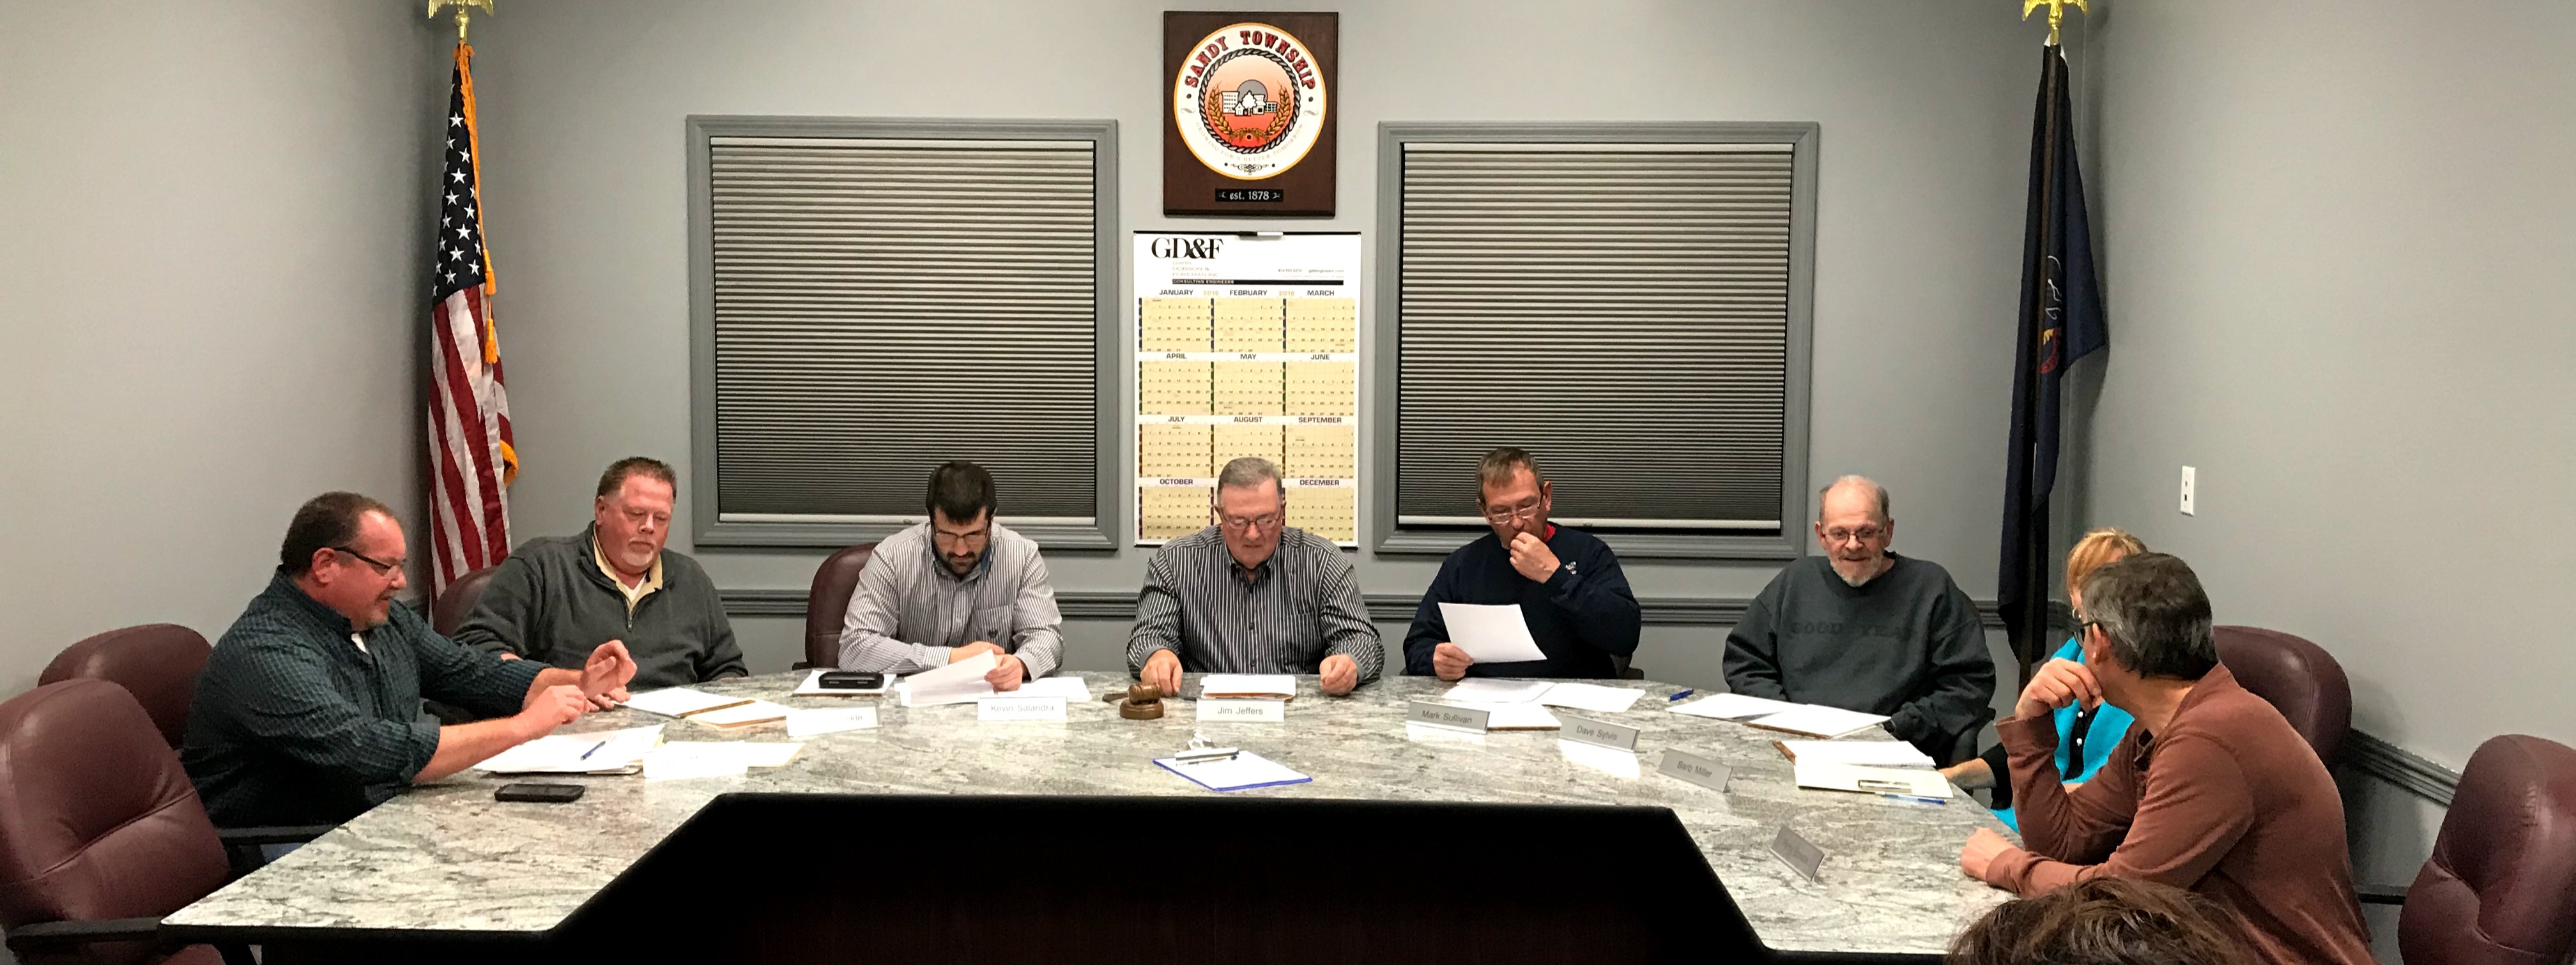 The Sandy Township Supervisors read through the letters of interest.
  (Photo by Steven McDole)